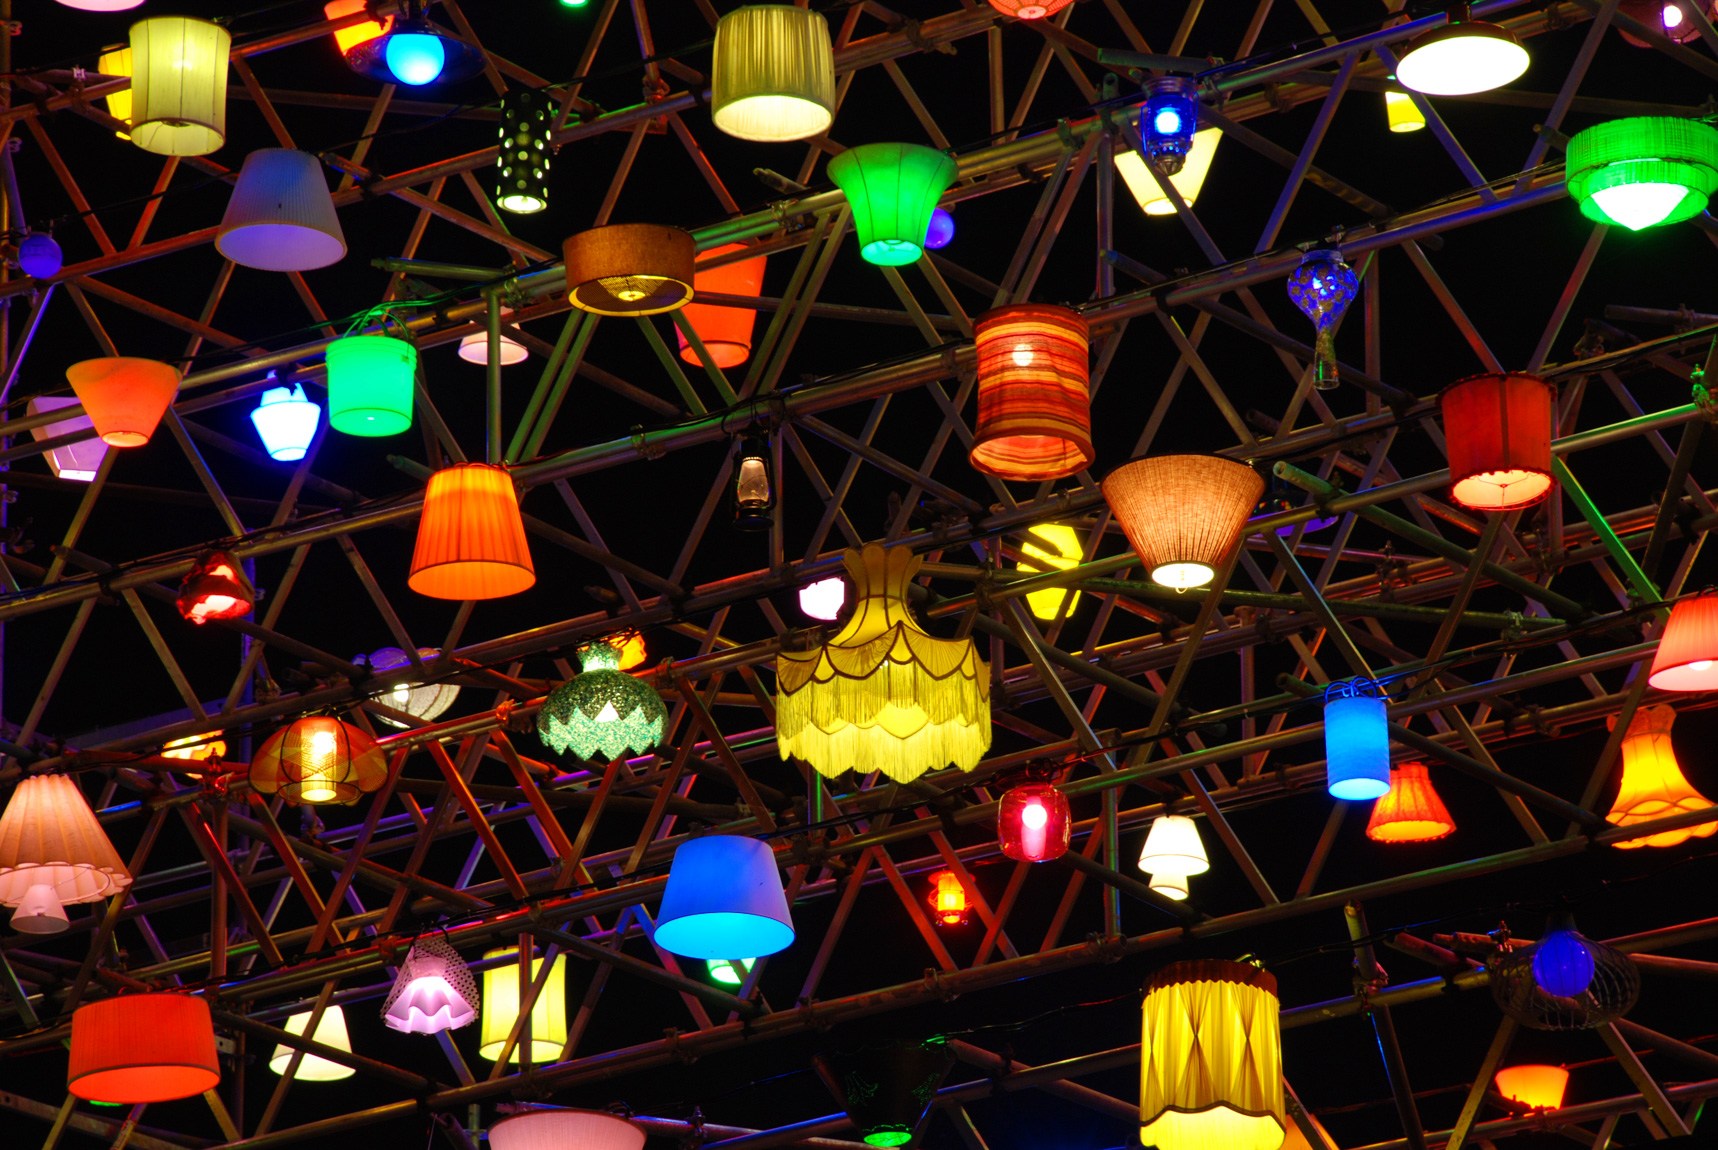 A detail shot of the lamps included in Kehres and Hungerer's "CHORUS" installation.